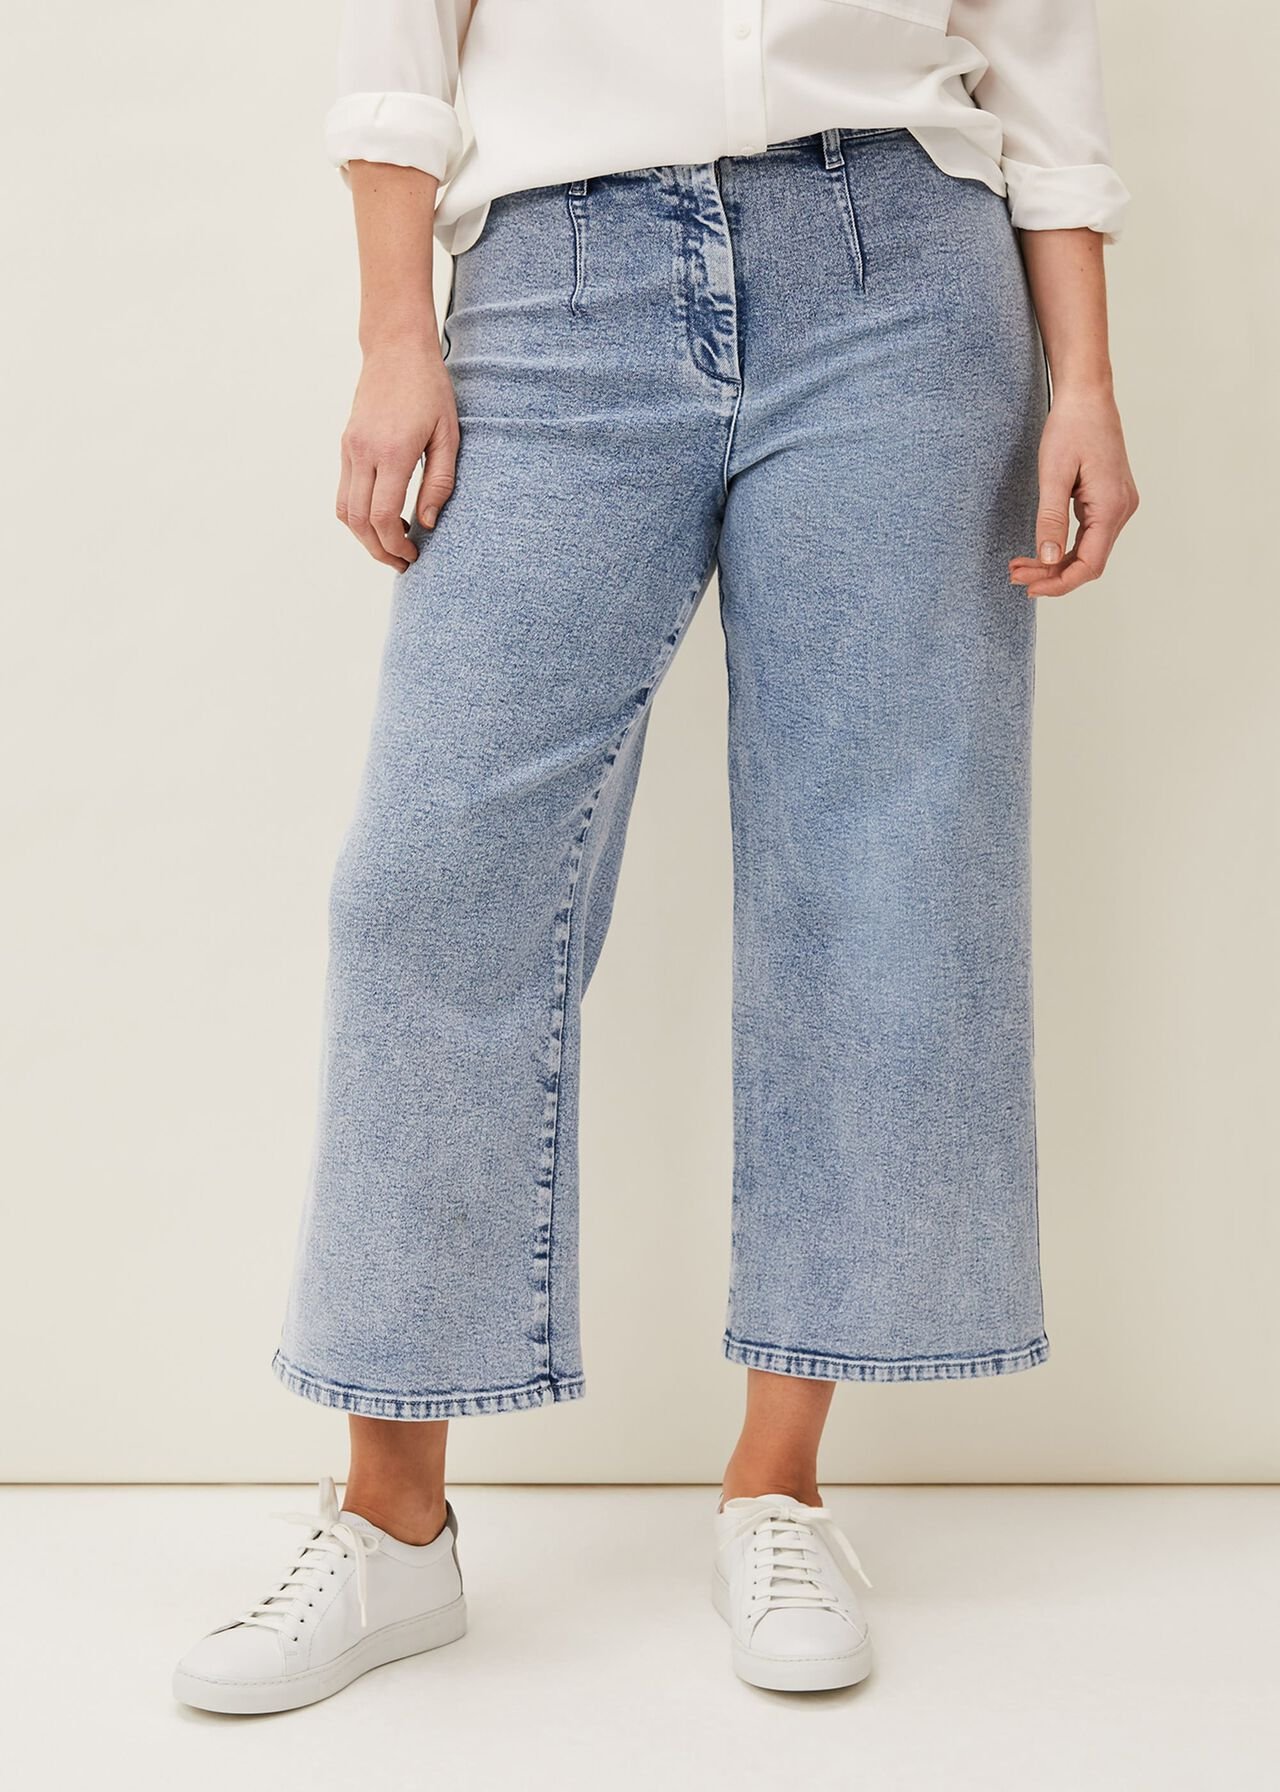 ${product-id}-Nora Denim Culotte Outfit--${view-type}